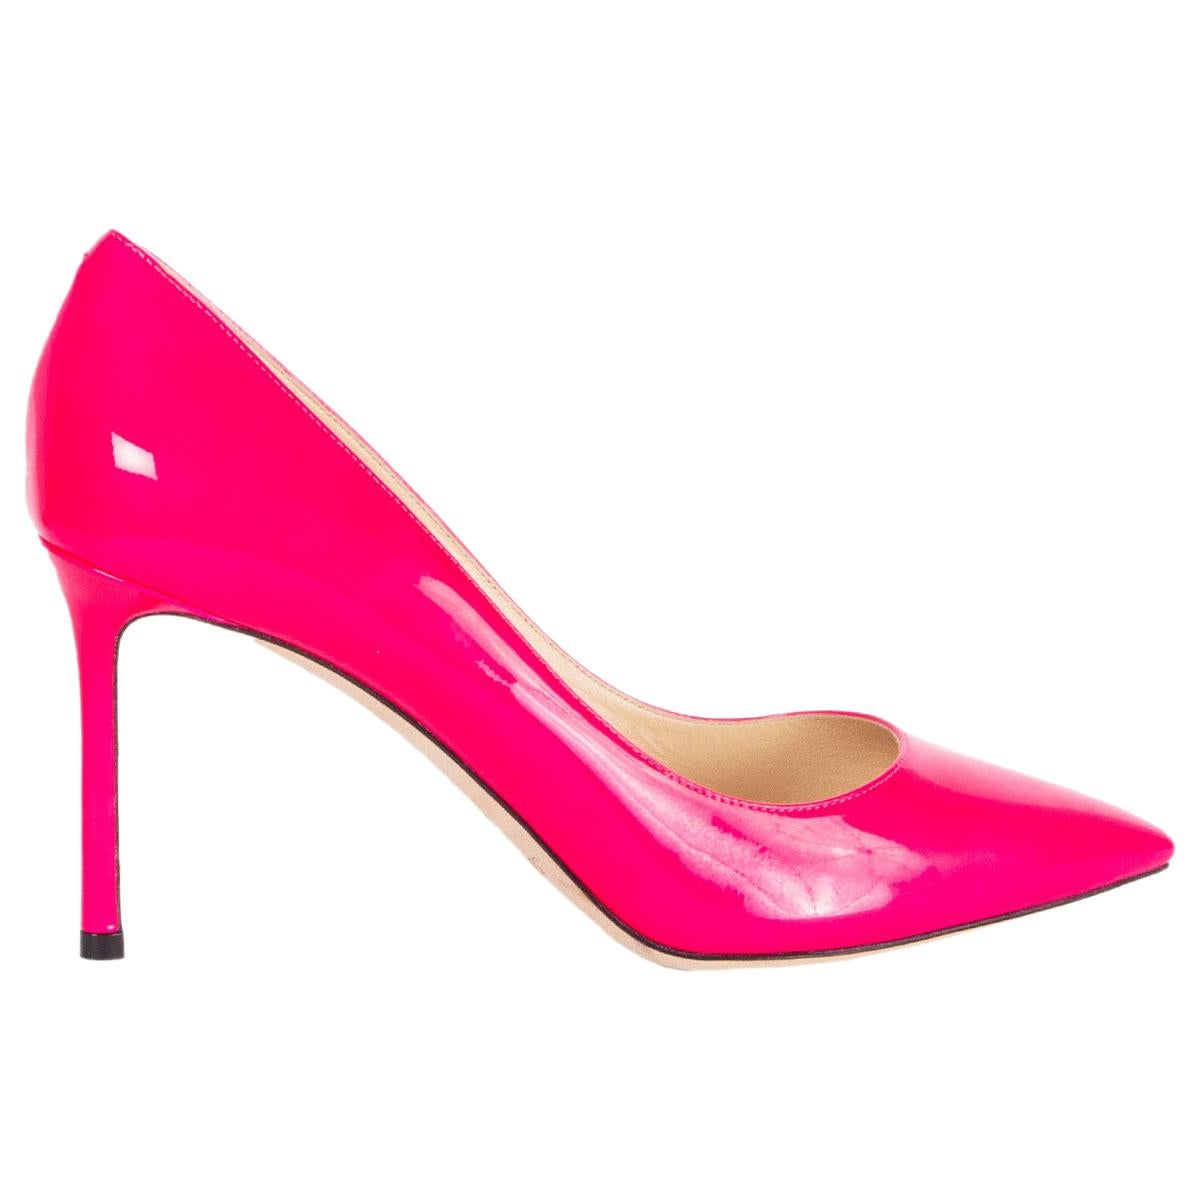 JIMMY CHOO hot pink patent leather ROMY 85 POINTED-TOE Pumps Shoes 39.5